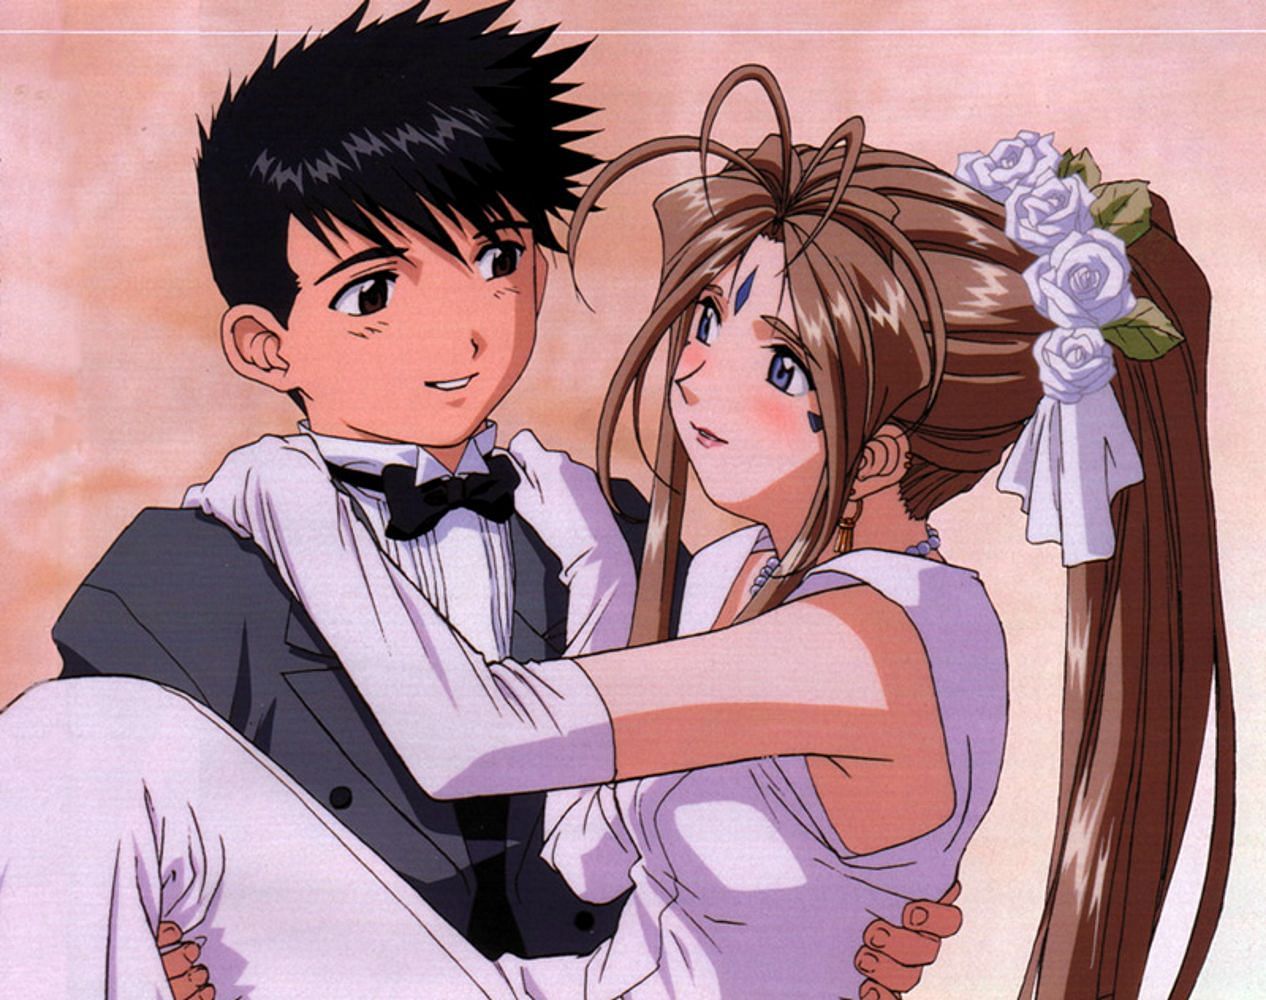 Keiichi ends up with Belldandy in this lighthearted and comedic anime (Image via AIC)